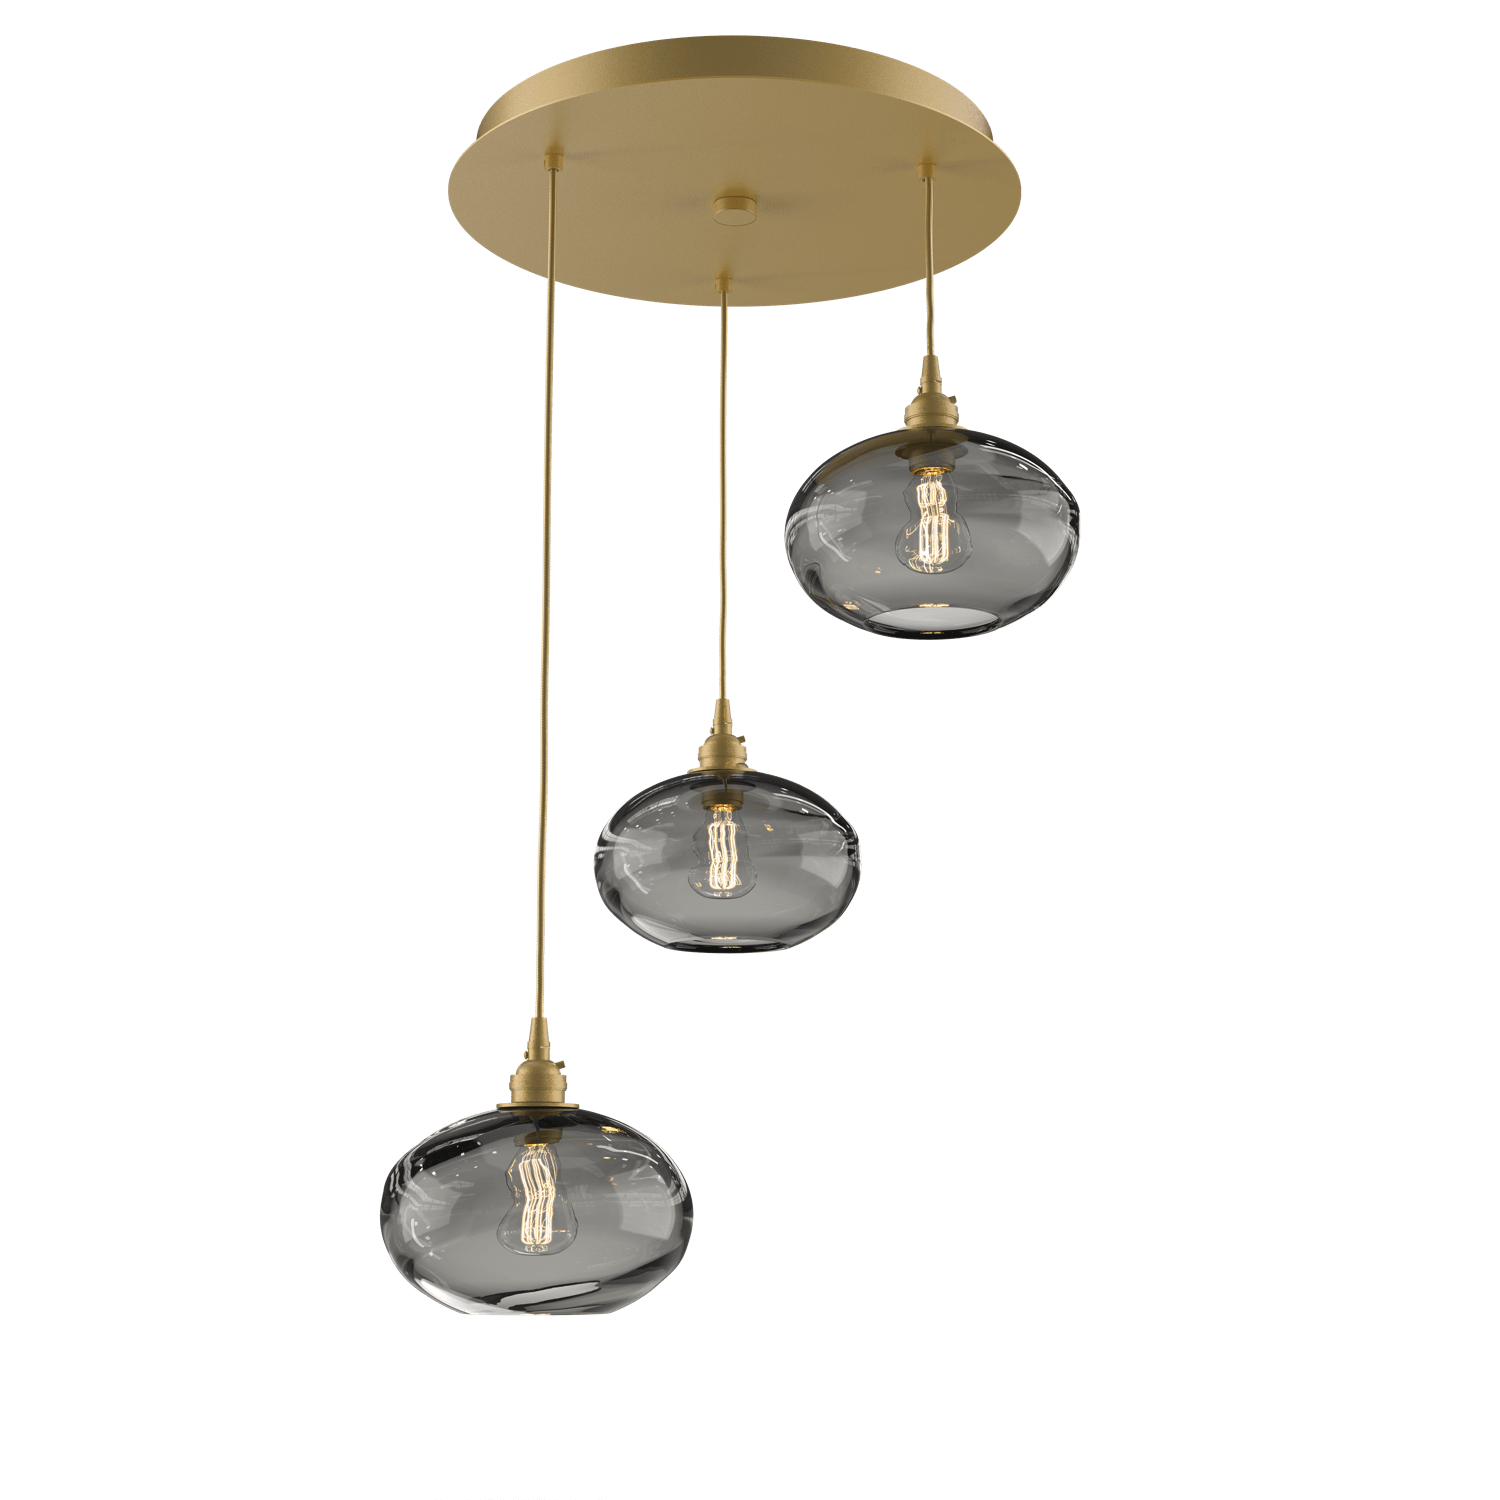 CHB0036-03-GB-OS-Hammerton-Studio-Optic-Blown-Glass-Coppa-3-light-round-pendant-chandelier-with-gilded-brass-finish-and-optic-smoke-blown-glass-shades-and-incandescent-lamping